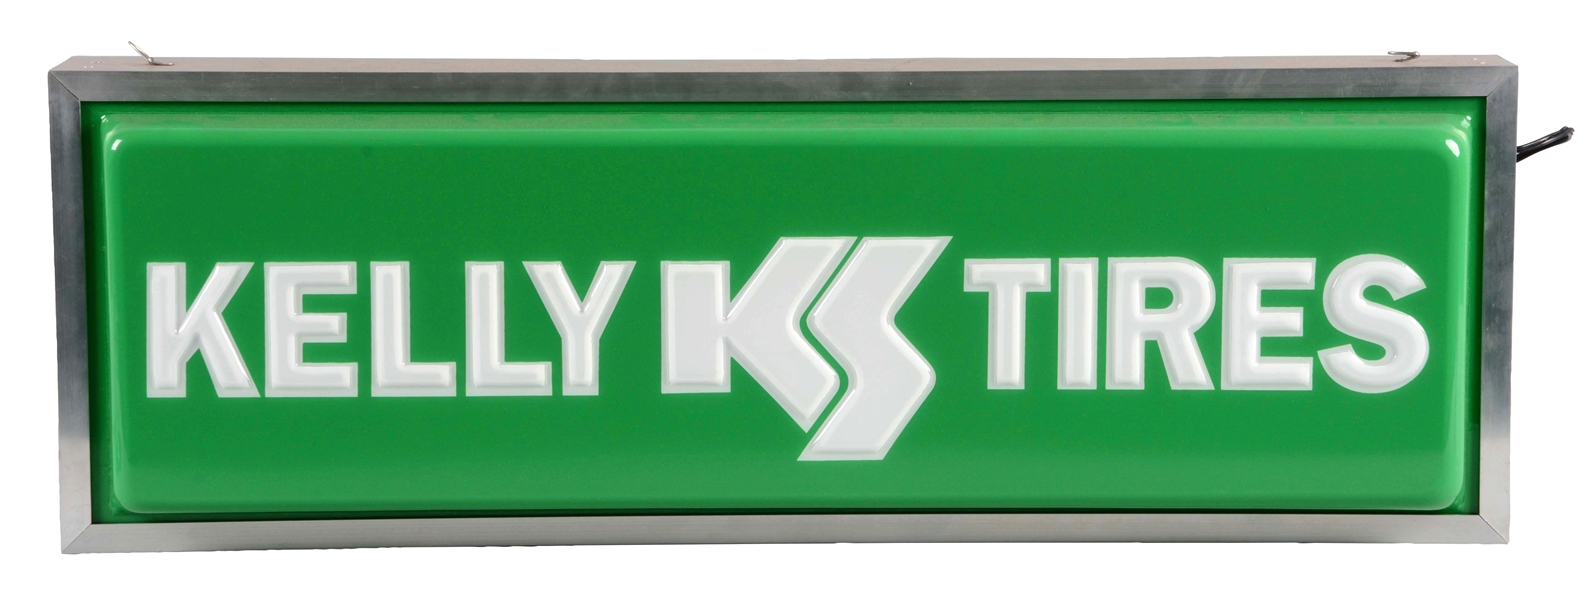 KELLY TIRES EMBOSSED PLASTIC LIGHT UP STORE DISPLAY SIGN.